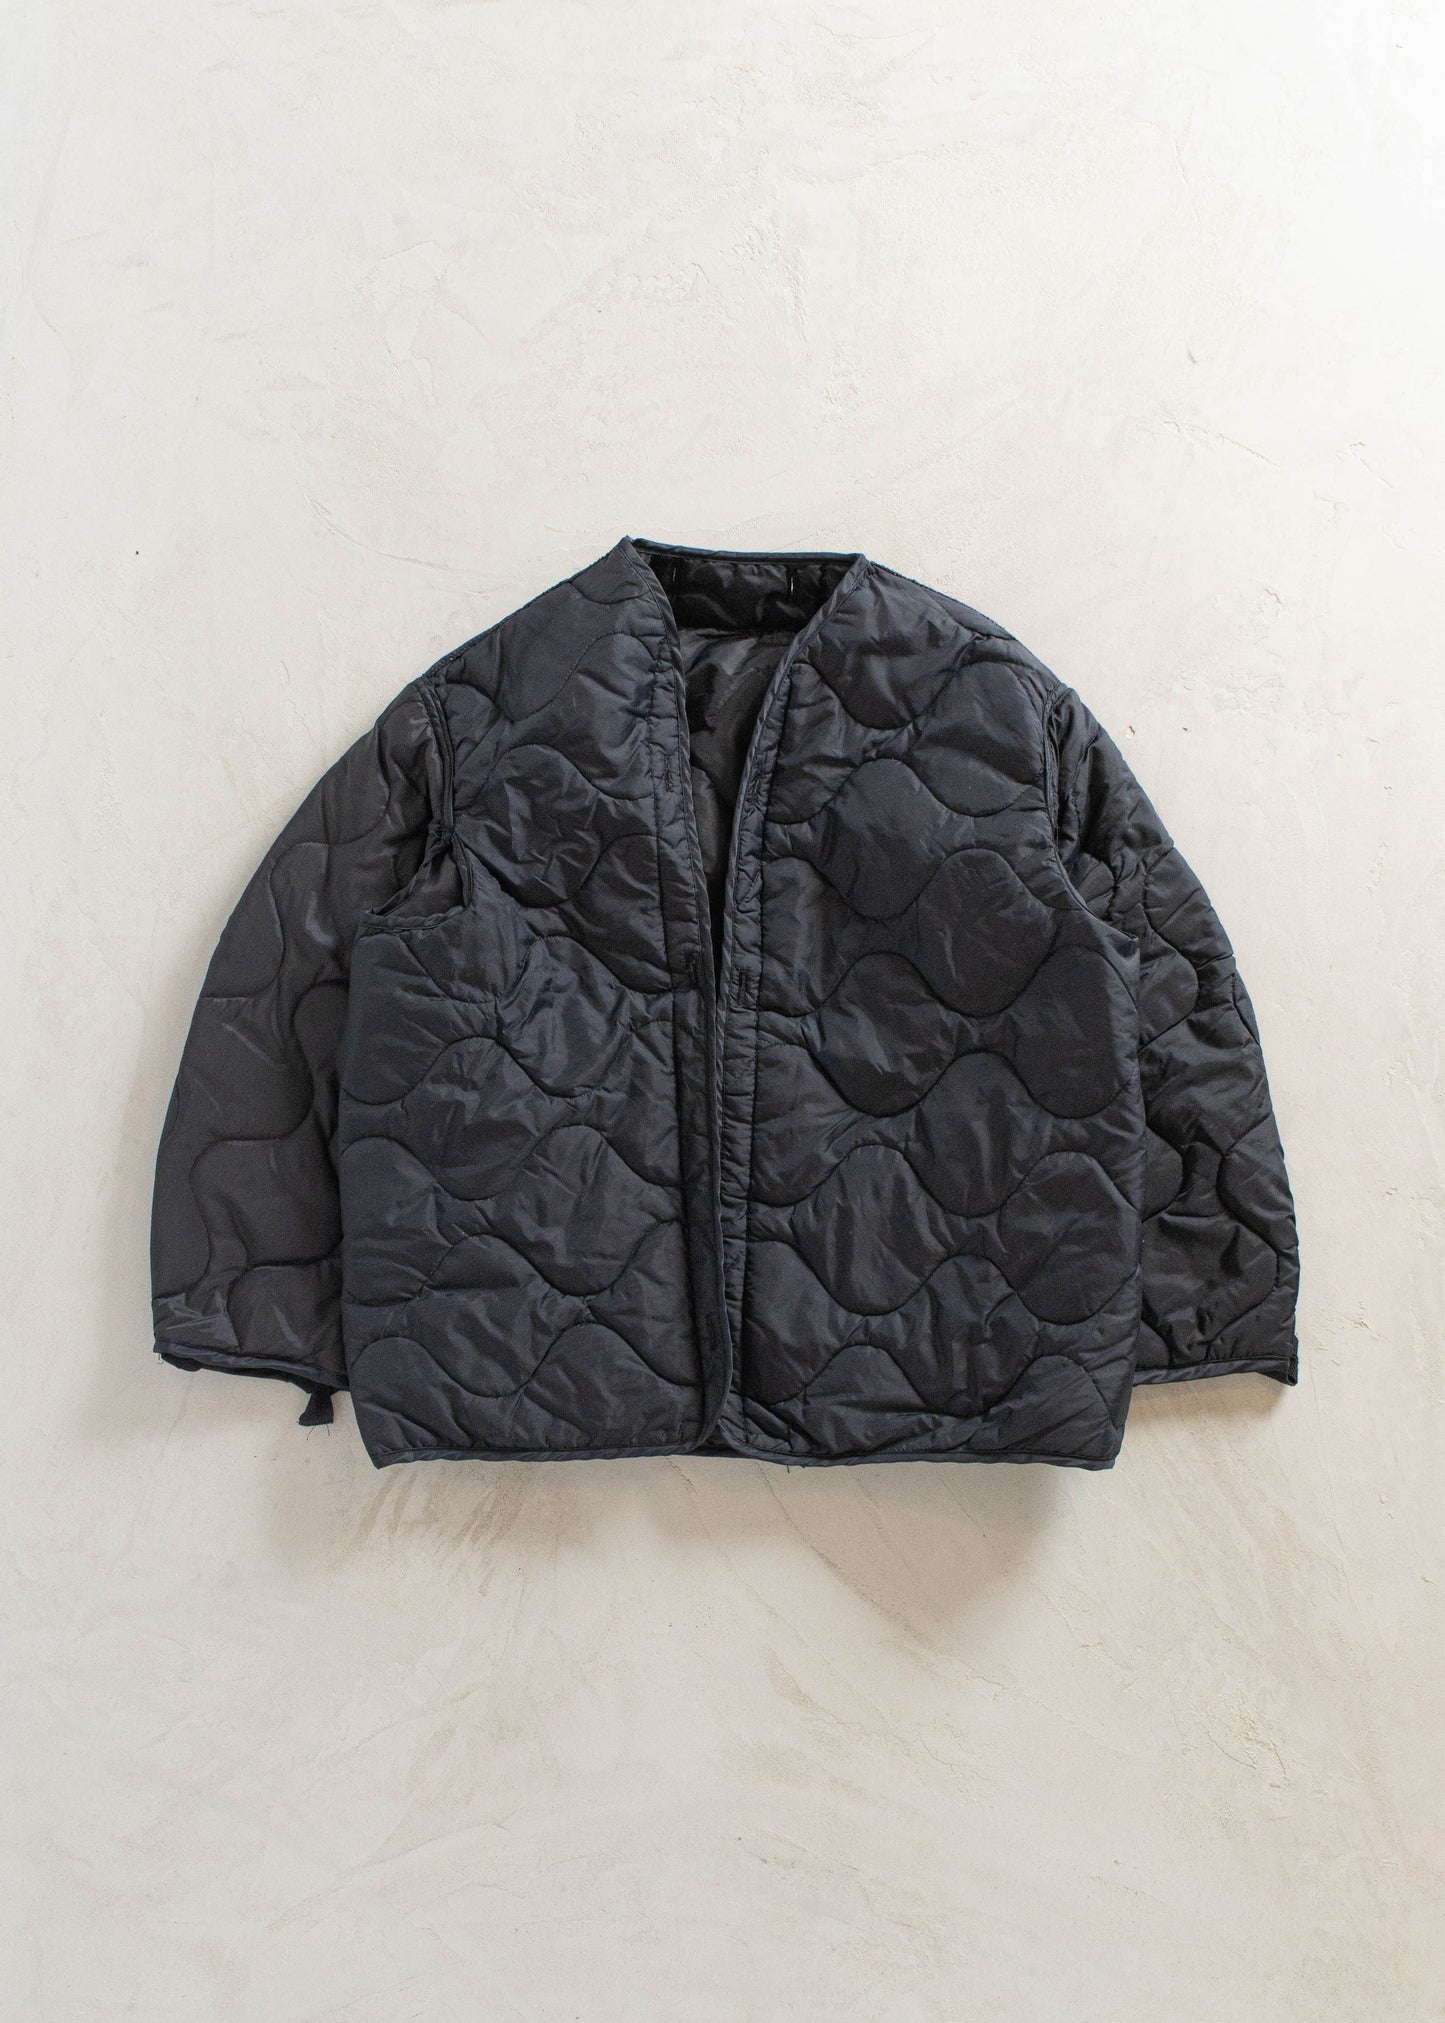 1980s Military Quilted Liner Jacket Size M/L